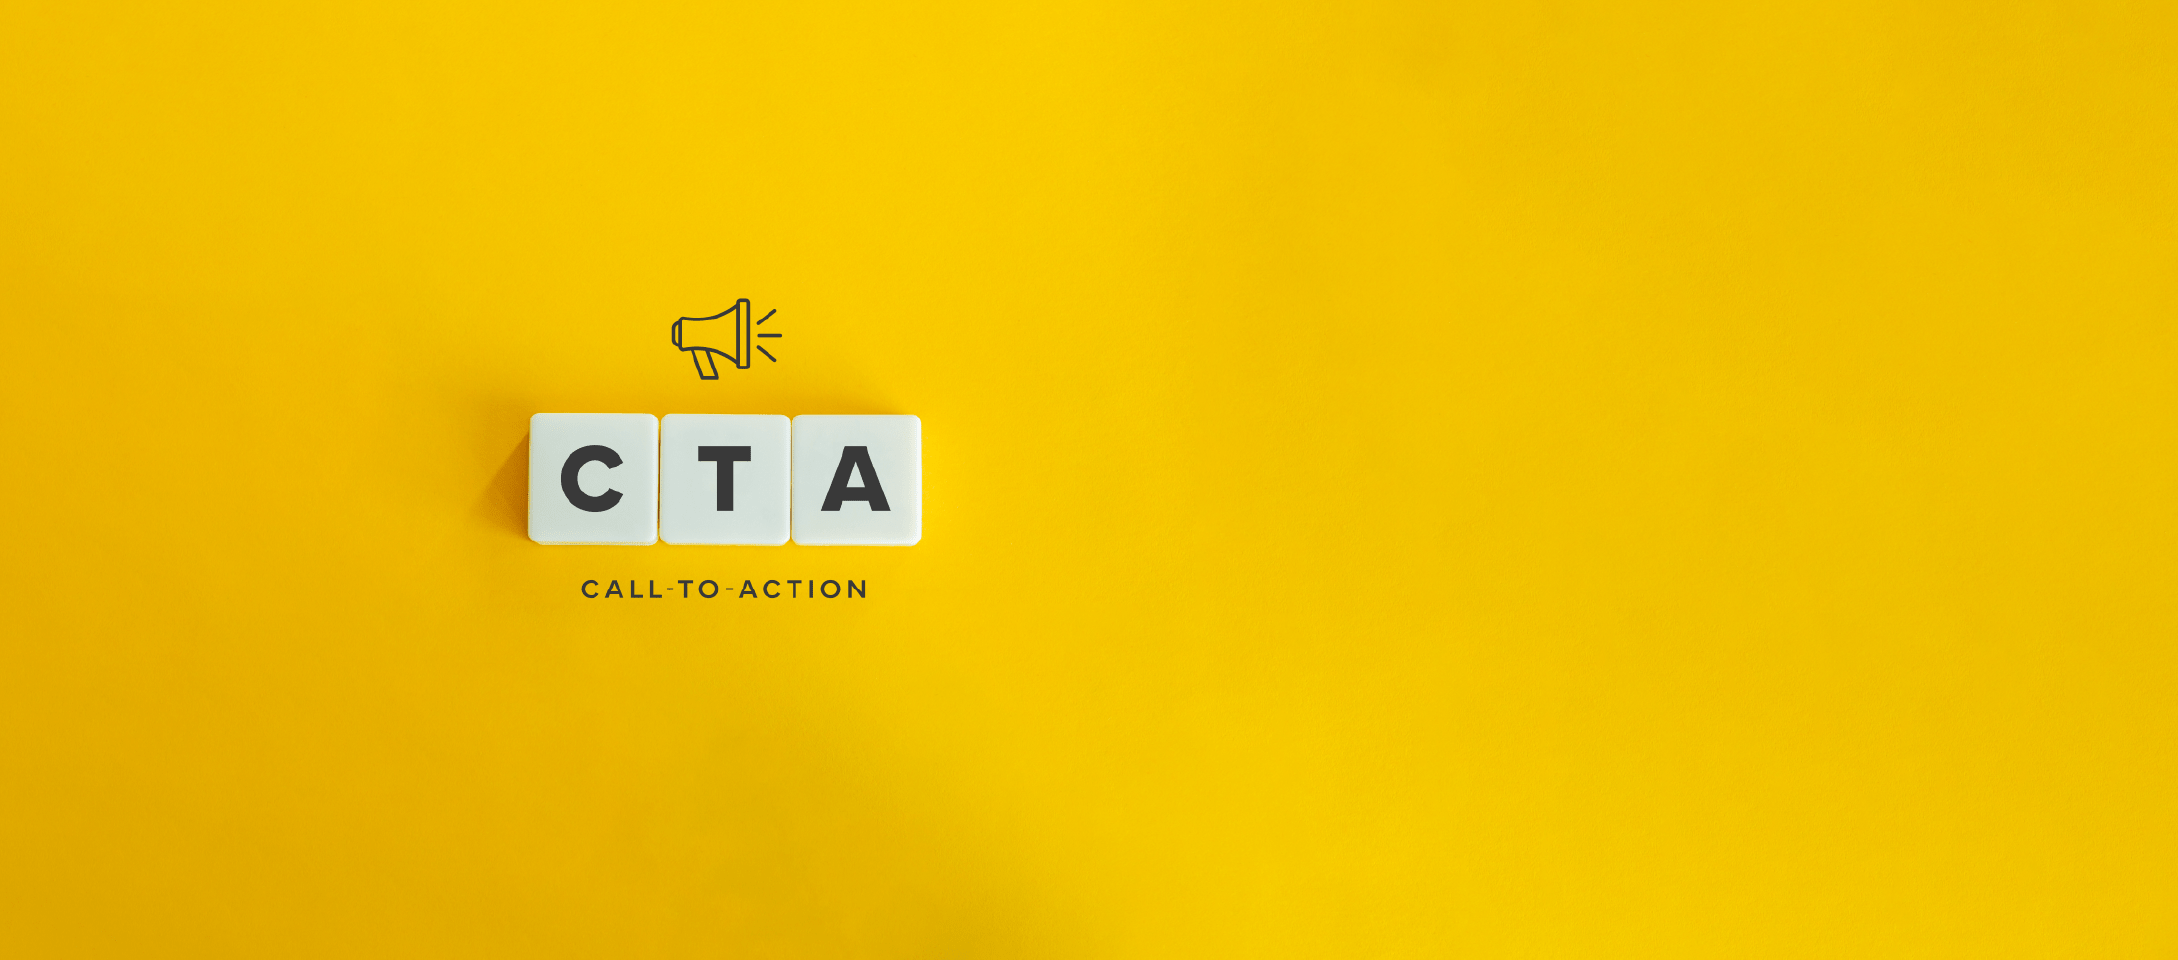 branded graphic demonstrating a CTA